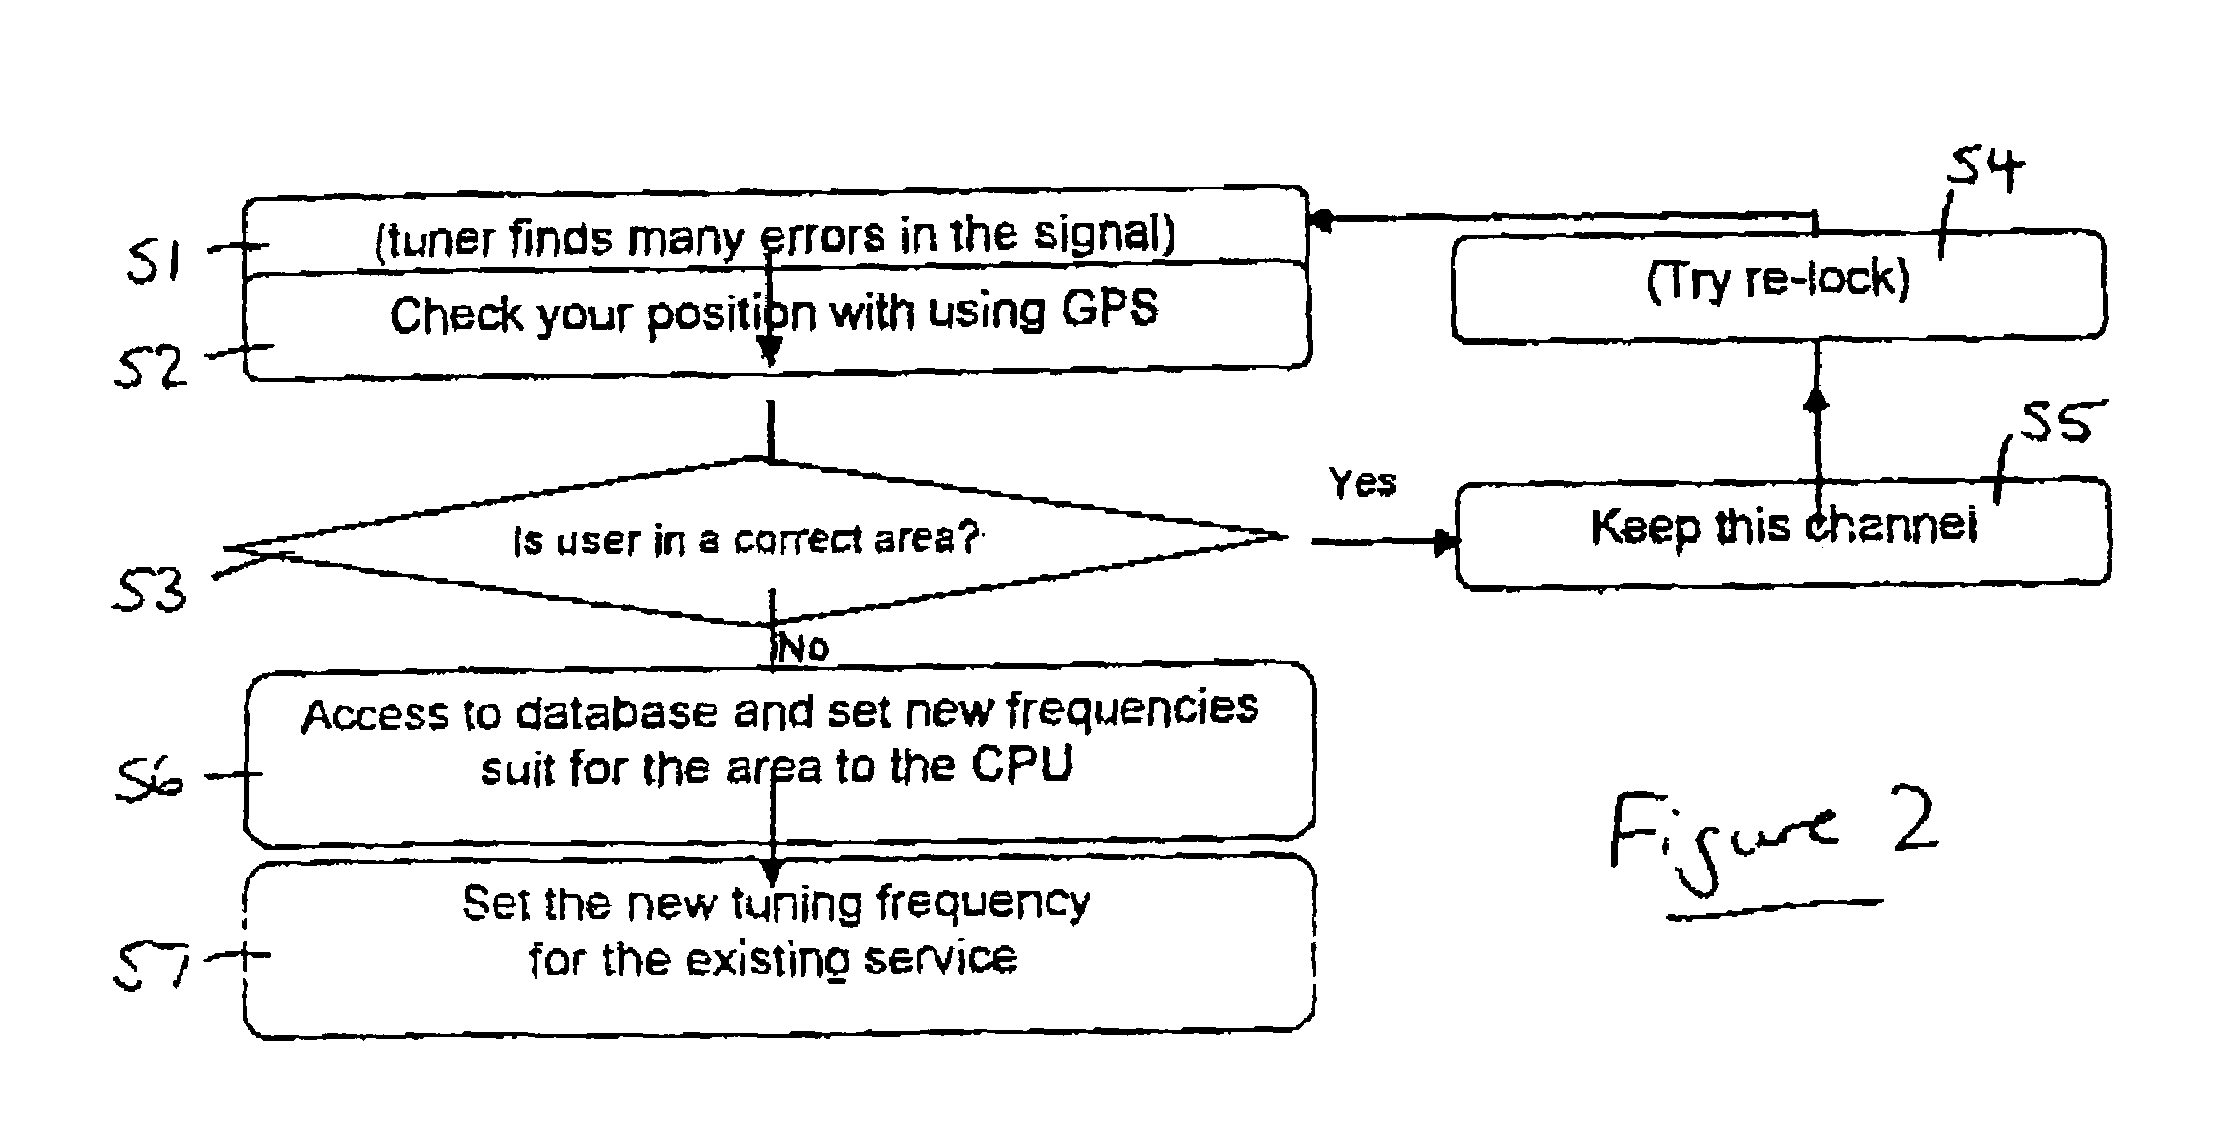 Automatic tuning system for a mobile DVB-T receiver